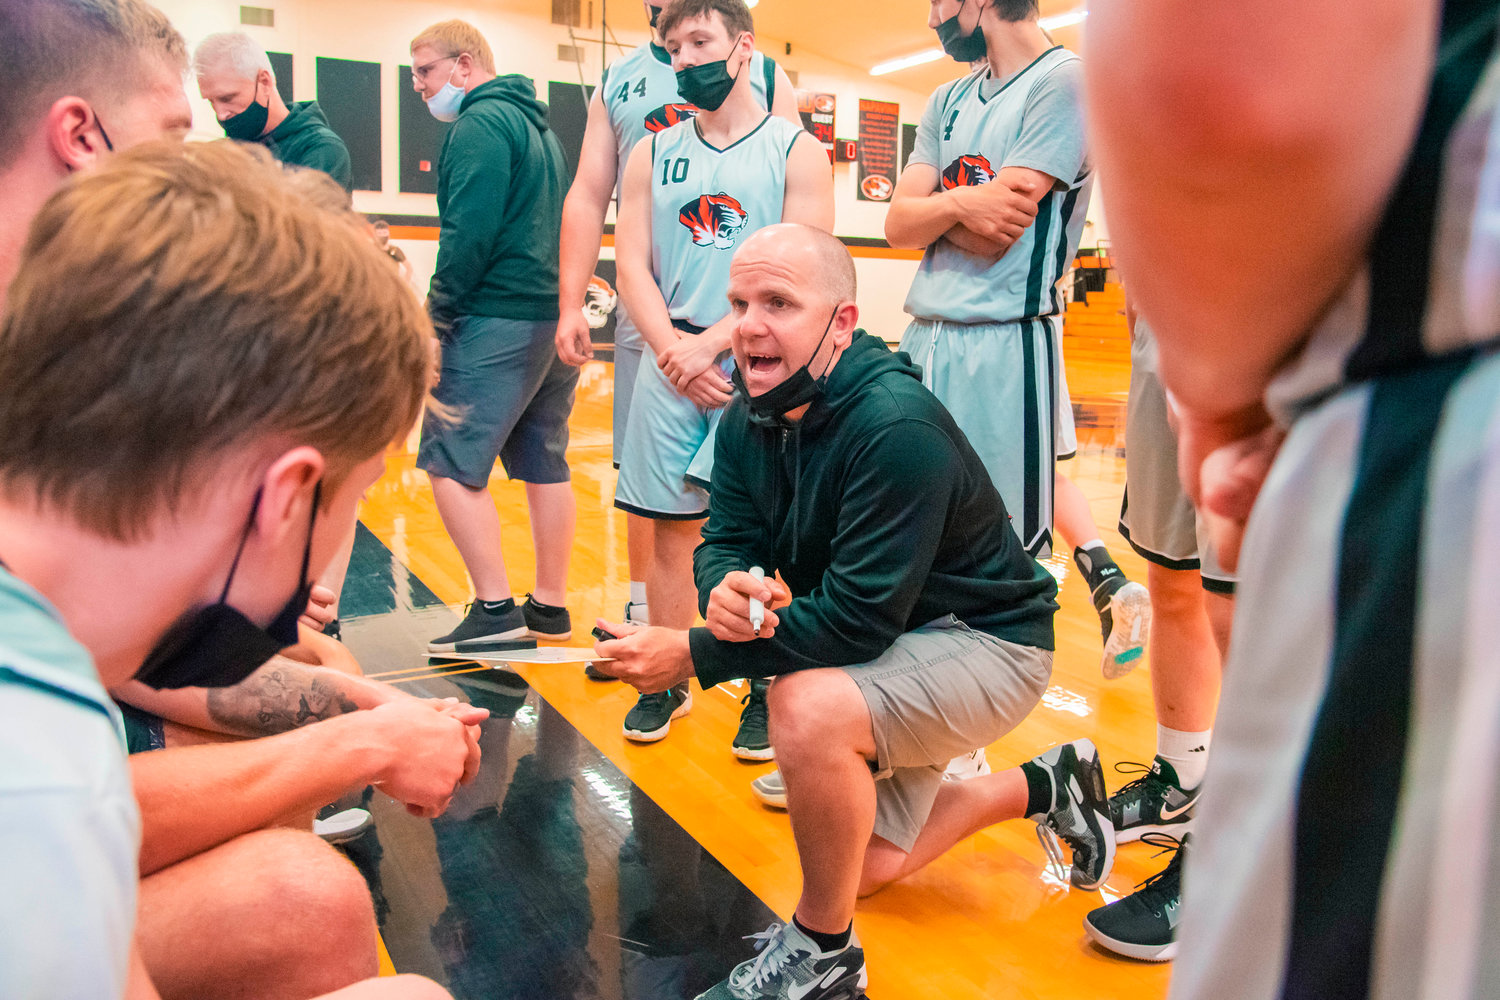 Head Coach Rex Stanley talks to players during a game in Napavine on Monday.